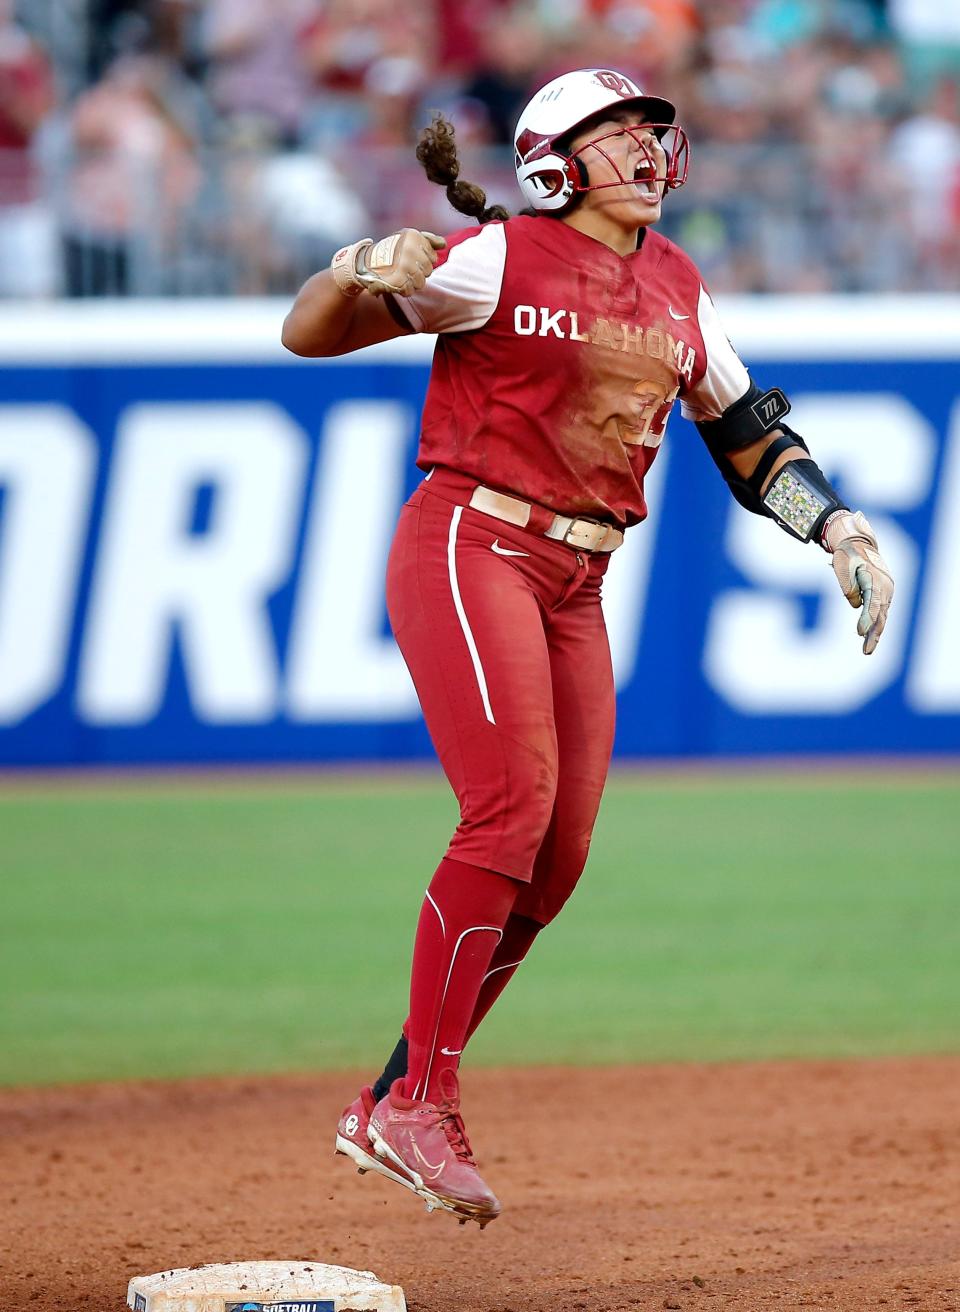 Oklahoma's Alyssa Brito (33) celebrates a double fifth inning during the second game of the championship series in the Women's College World Series between the University of Oklahoma Sooners (OU) and the Texas Longhorns at USA Softball Hall of Fame Stadium in Oklahoma City, Thursday, June 9, 2022. 